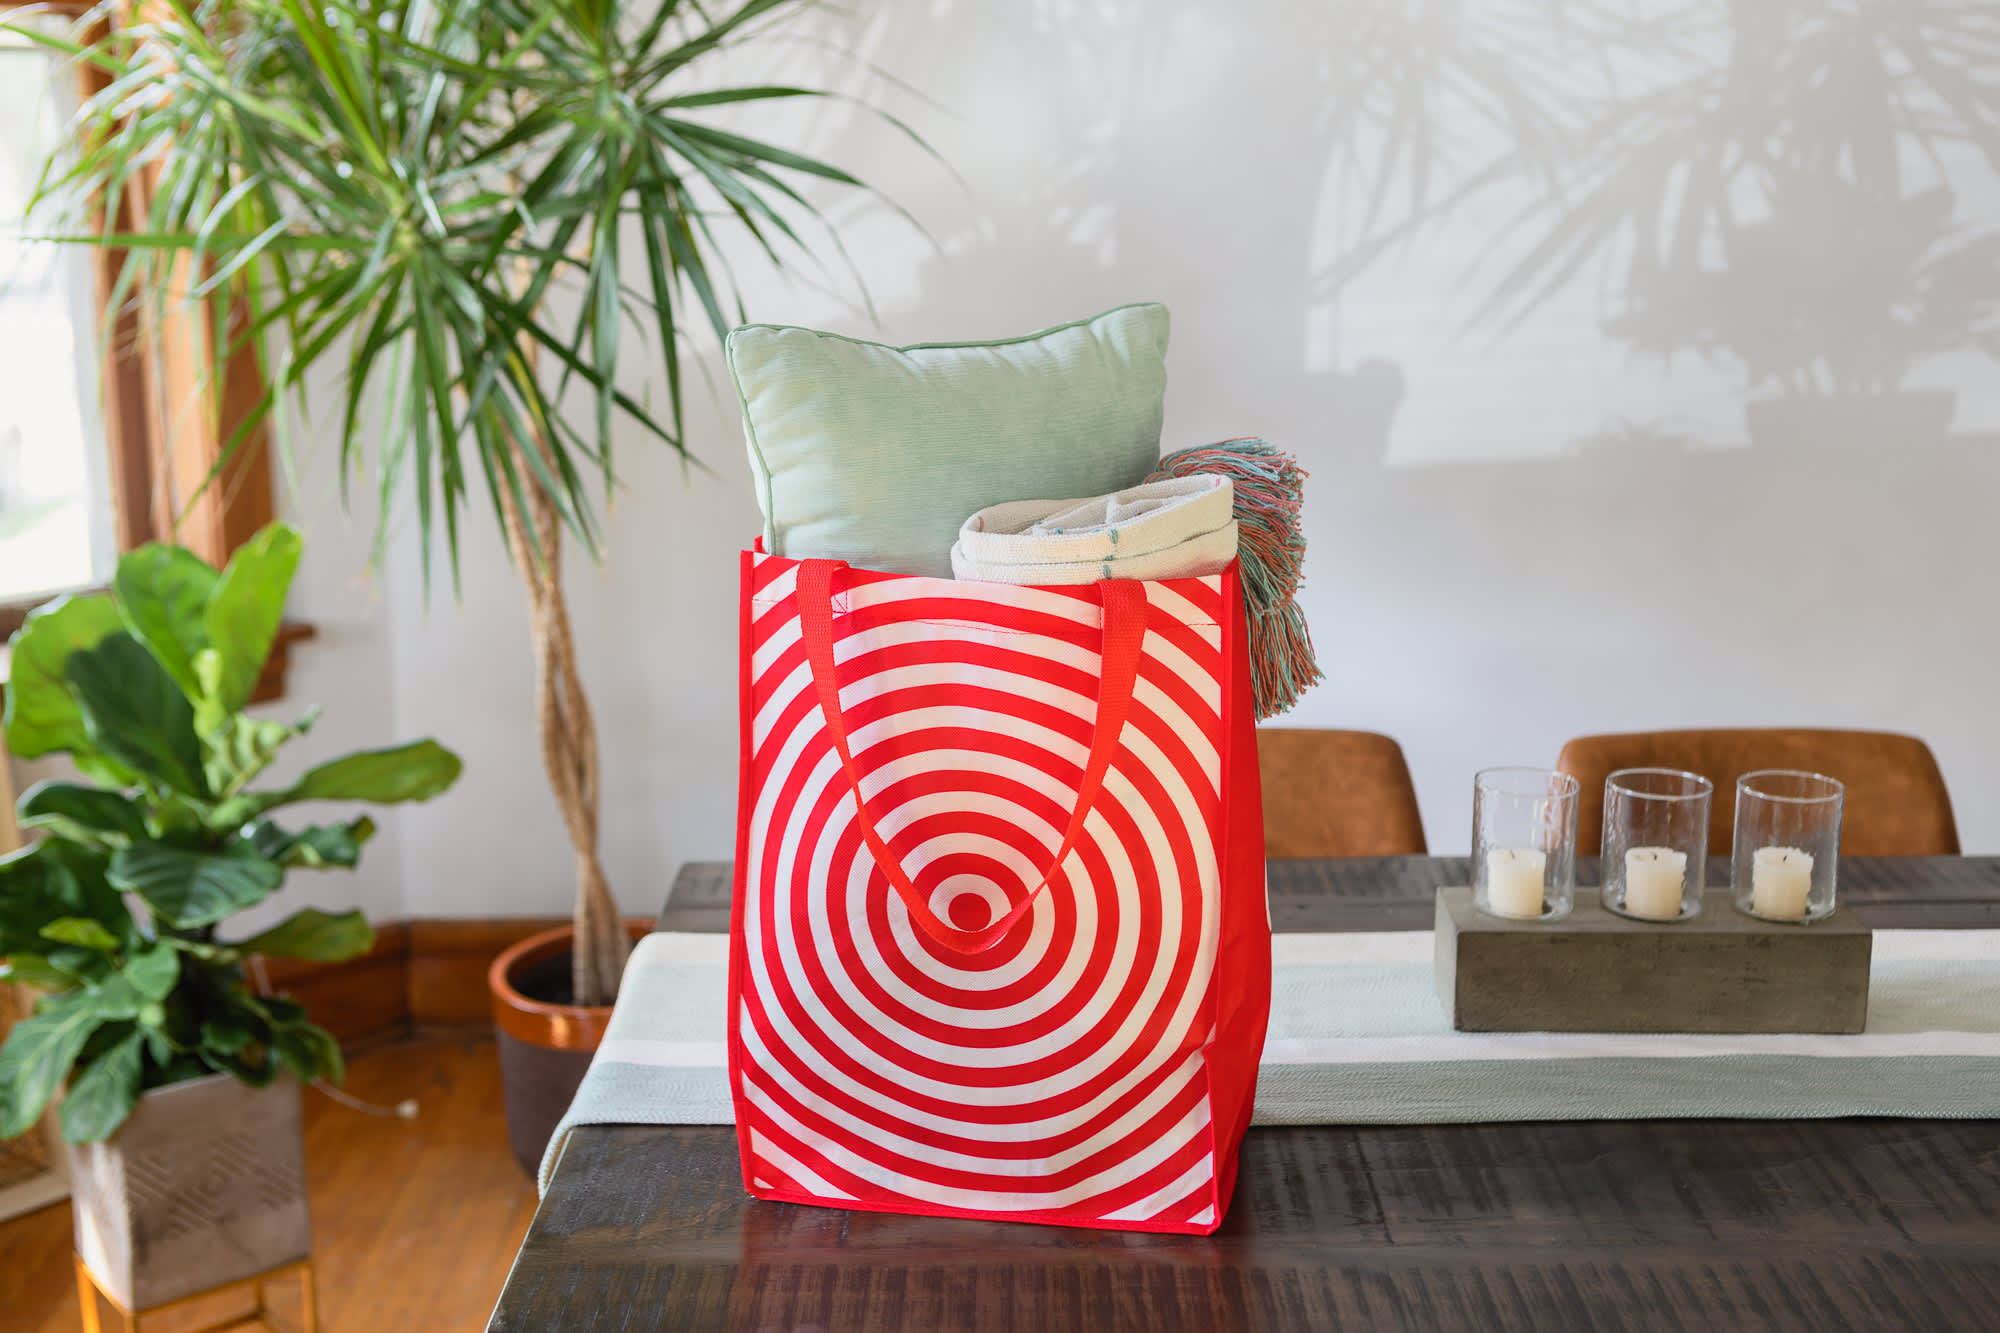 TikTok Target home finds to add to your list